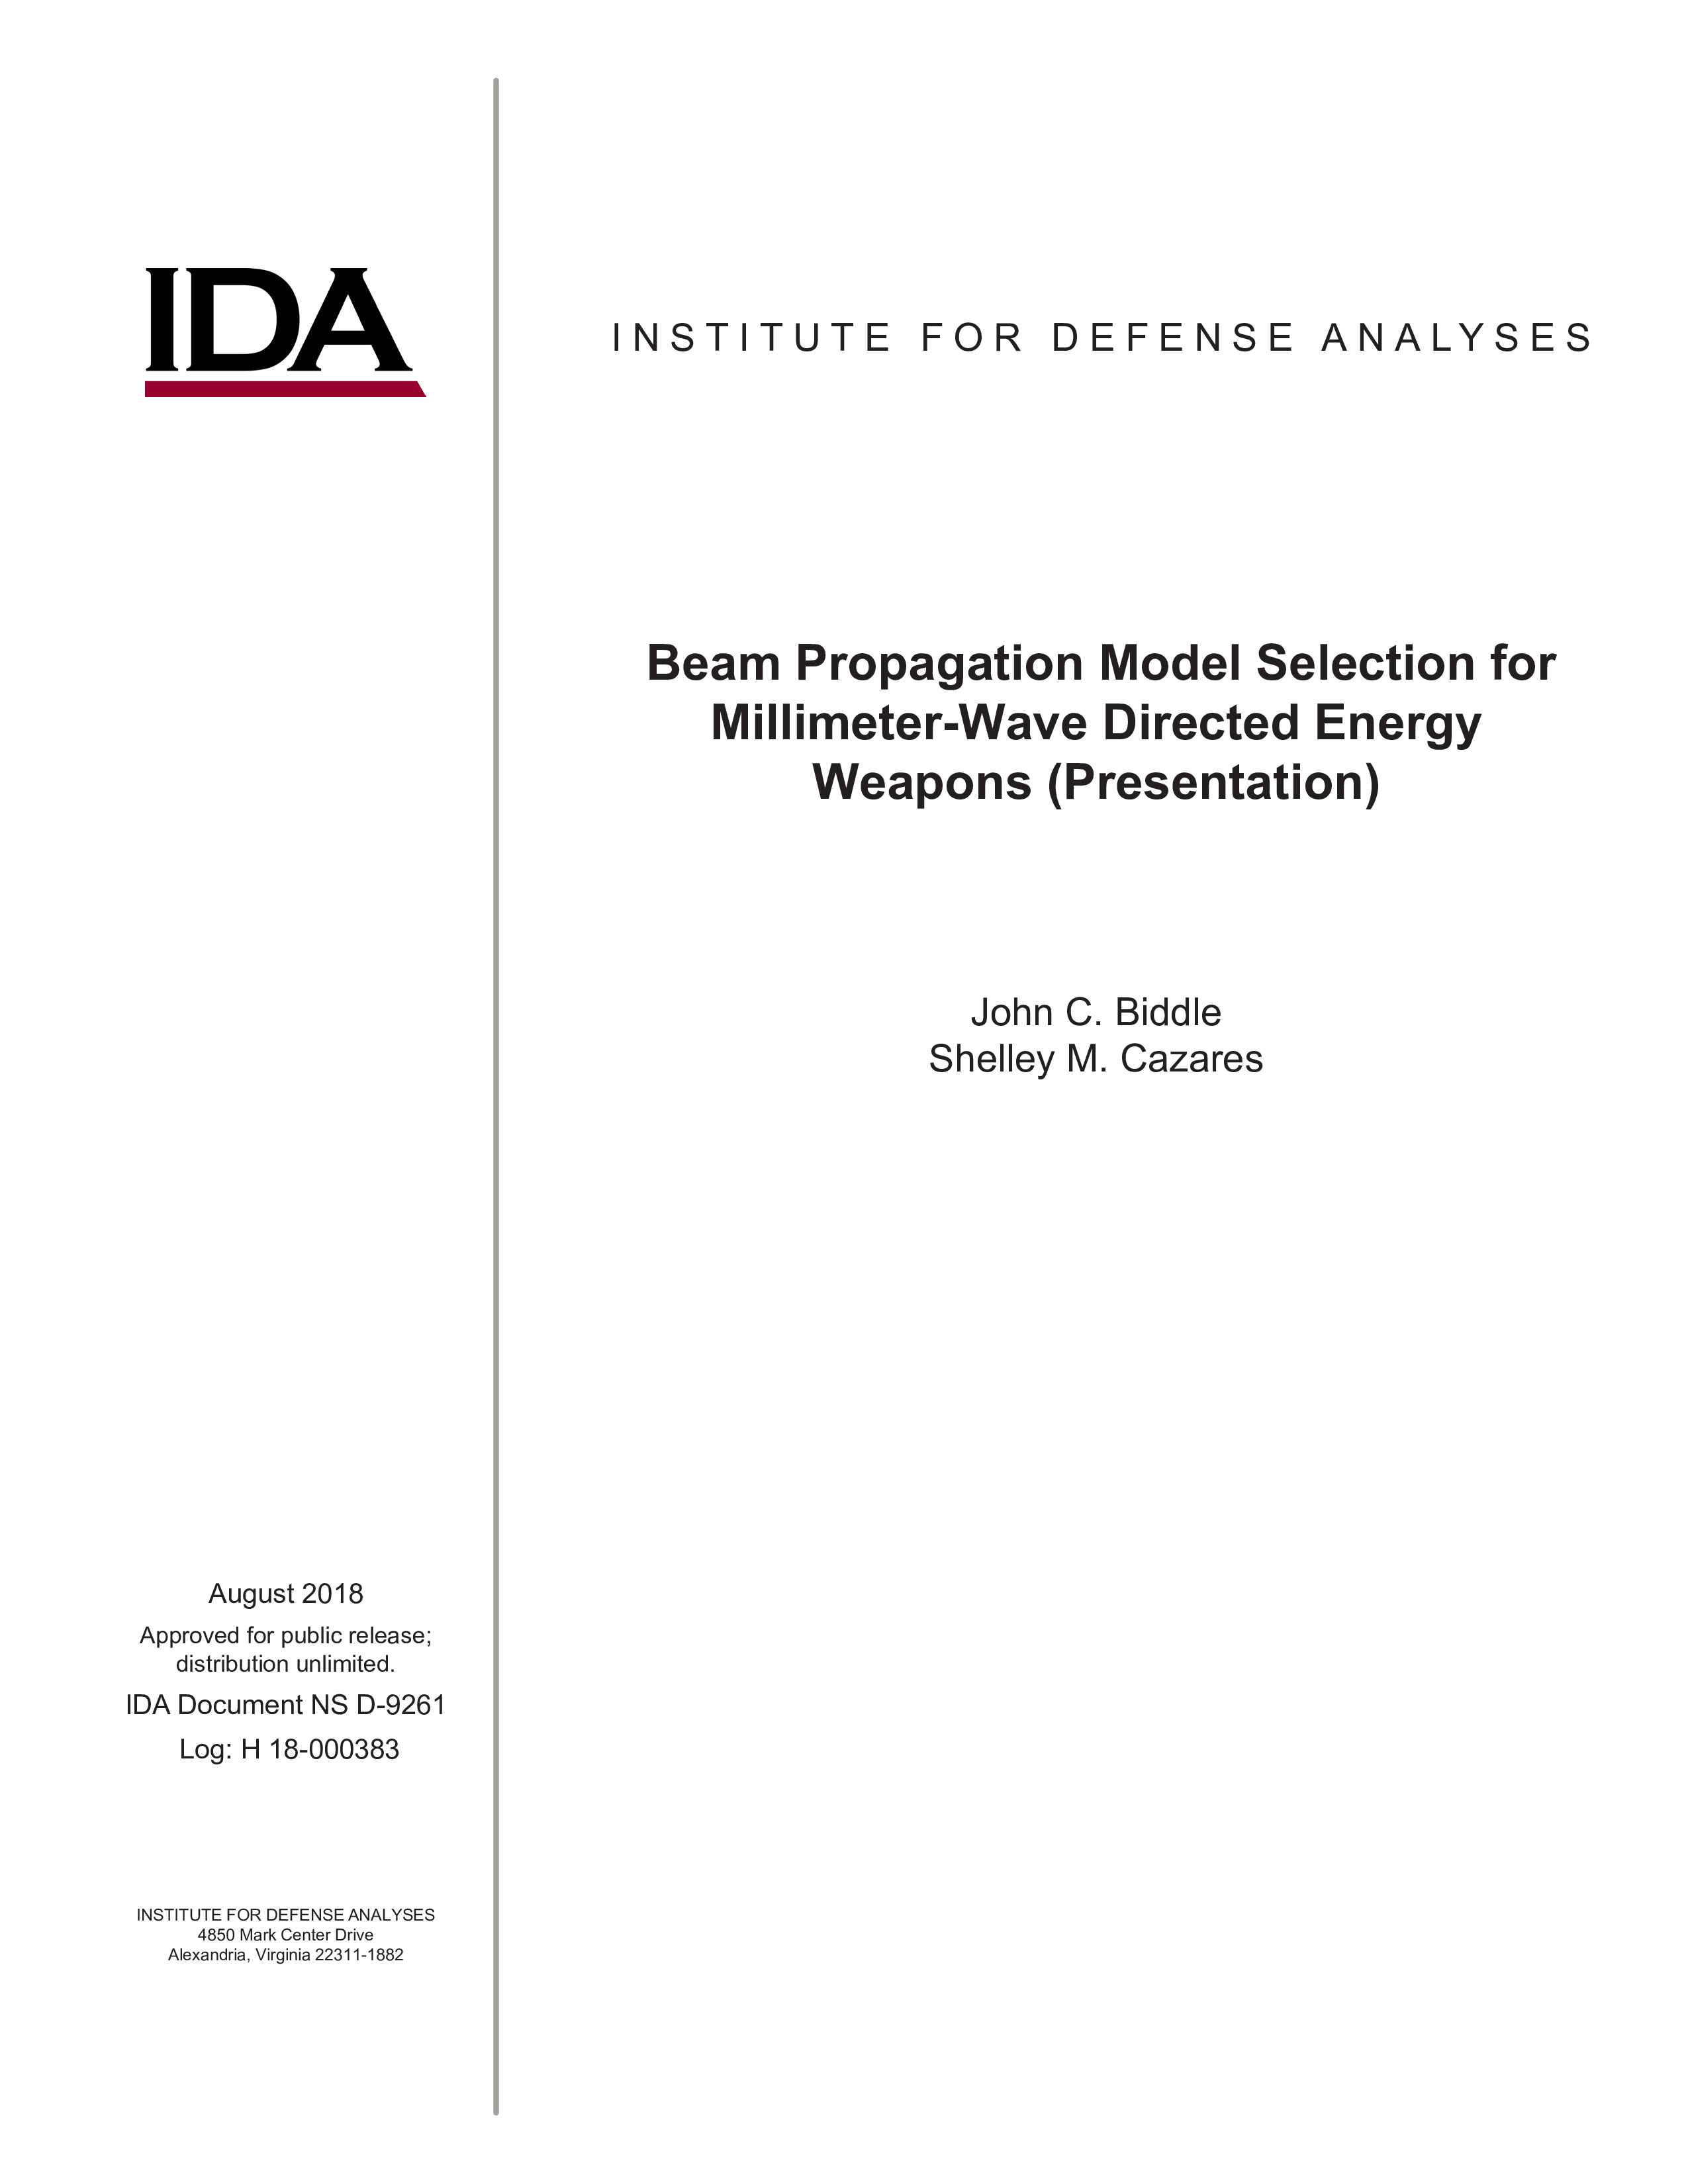 Beam Propagation Model Selection for Millimeter-Wave Directed Energy Weapons (Presentation)